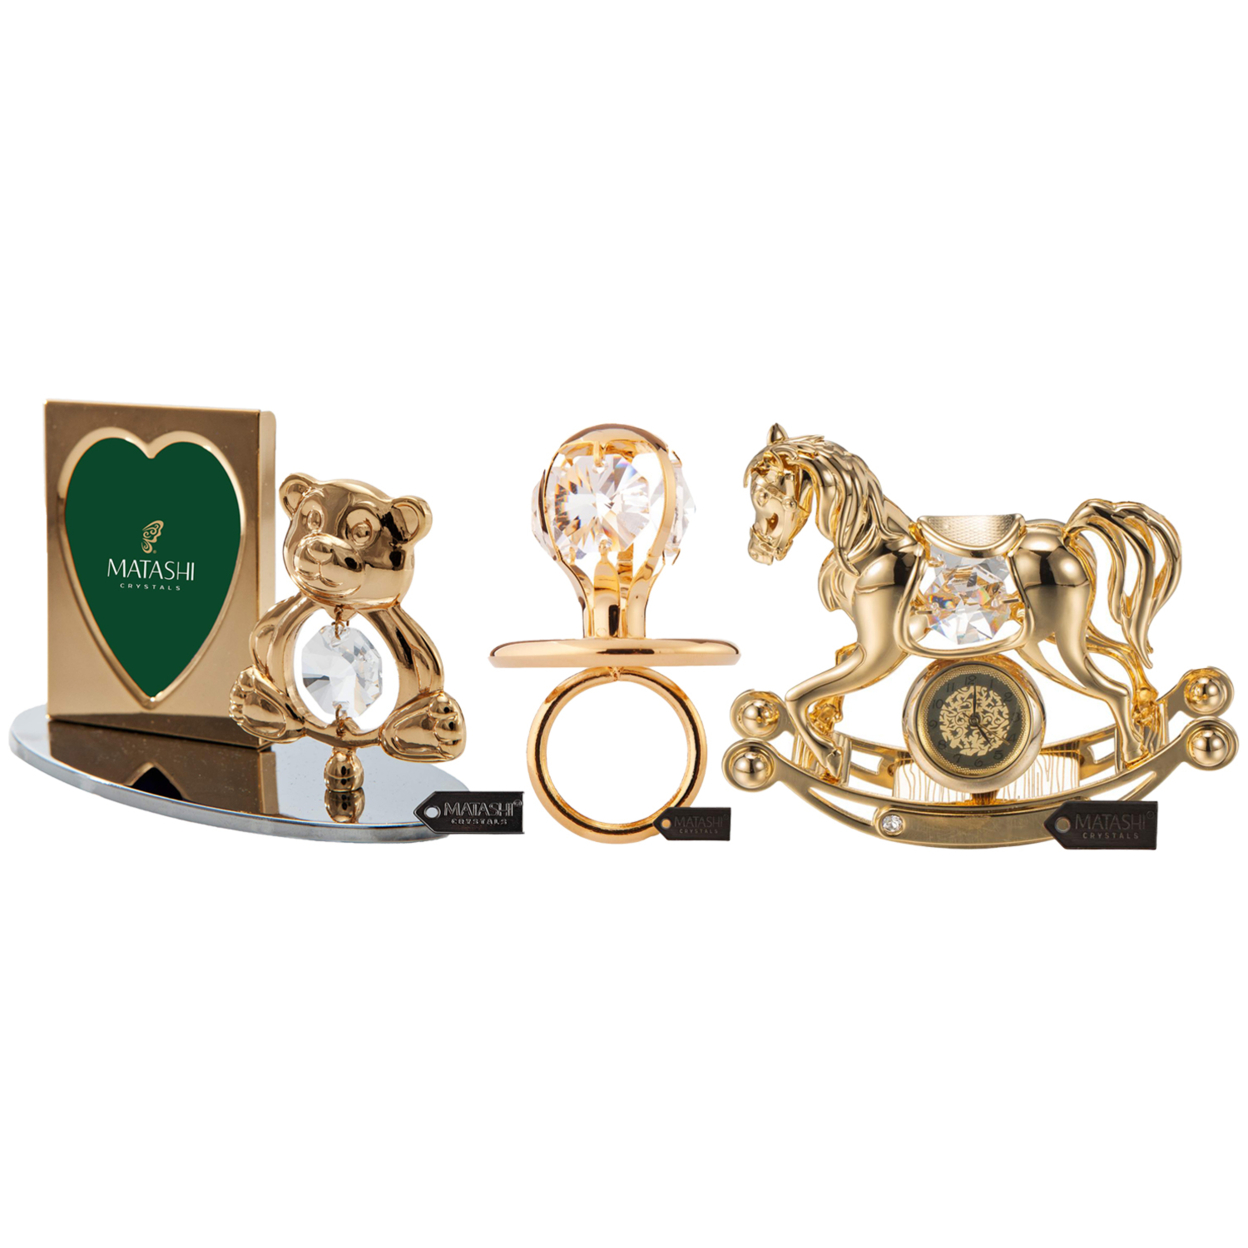 Matashi 24k Gold Plated Picture Frame With Teddy Bear Figurine, Rocking Horse Desk Clock And Baby Pacifier Ornament